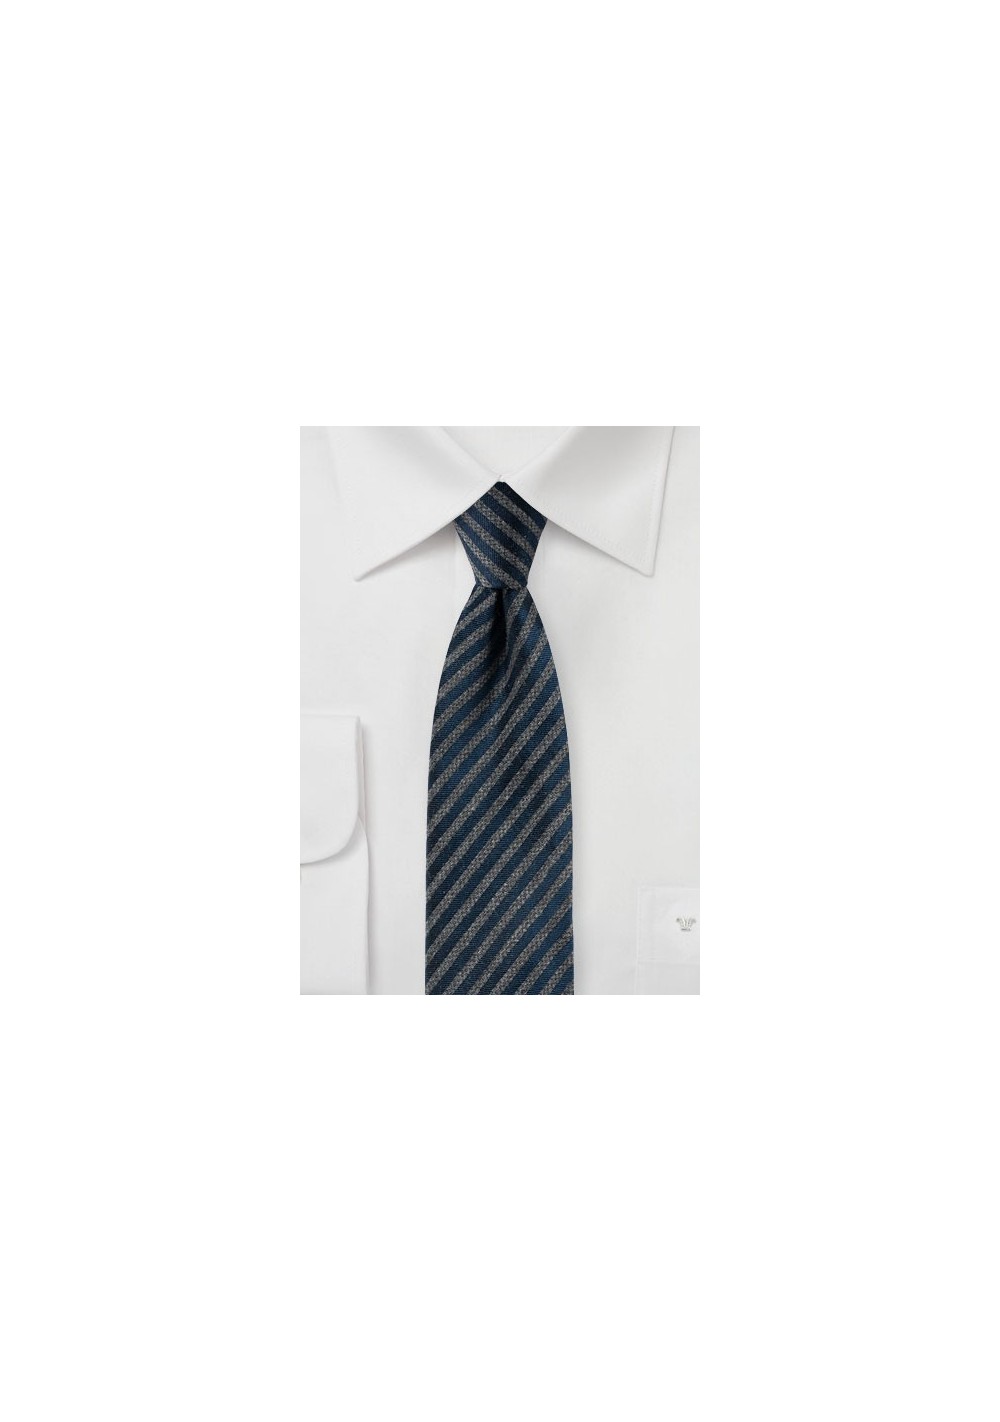 Modern Striped Tie in Navy and Gray